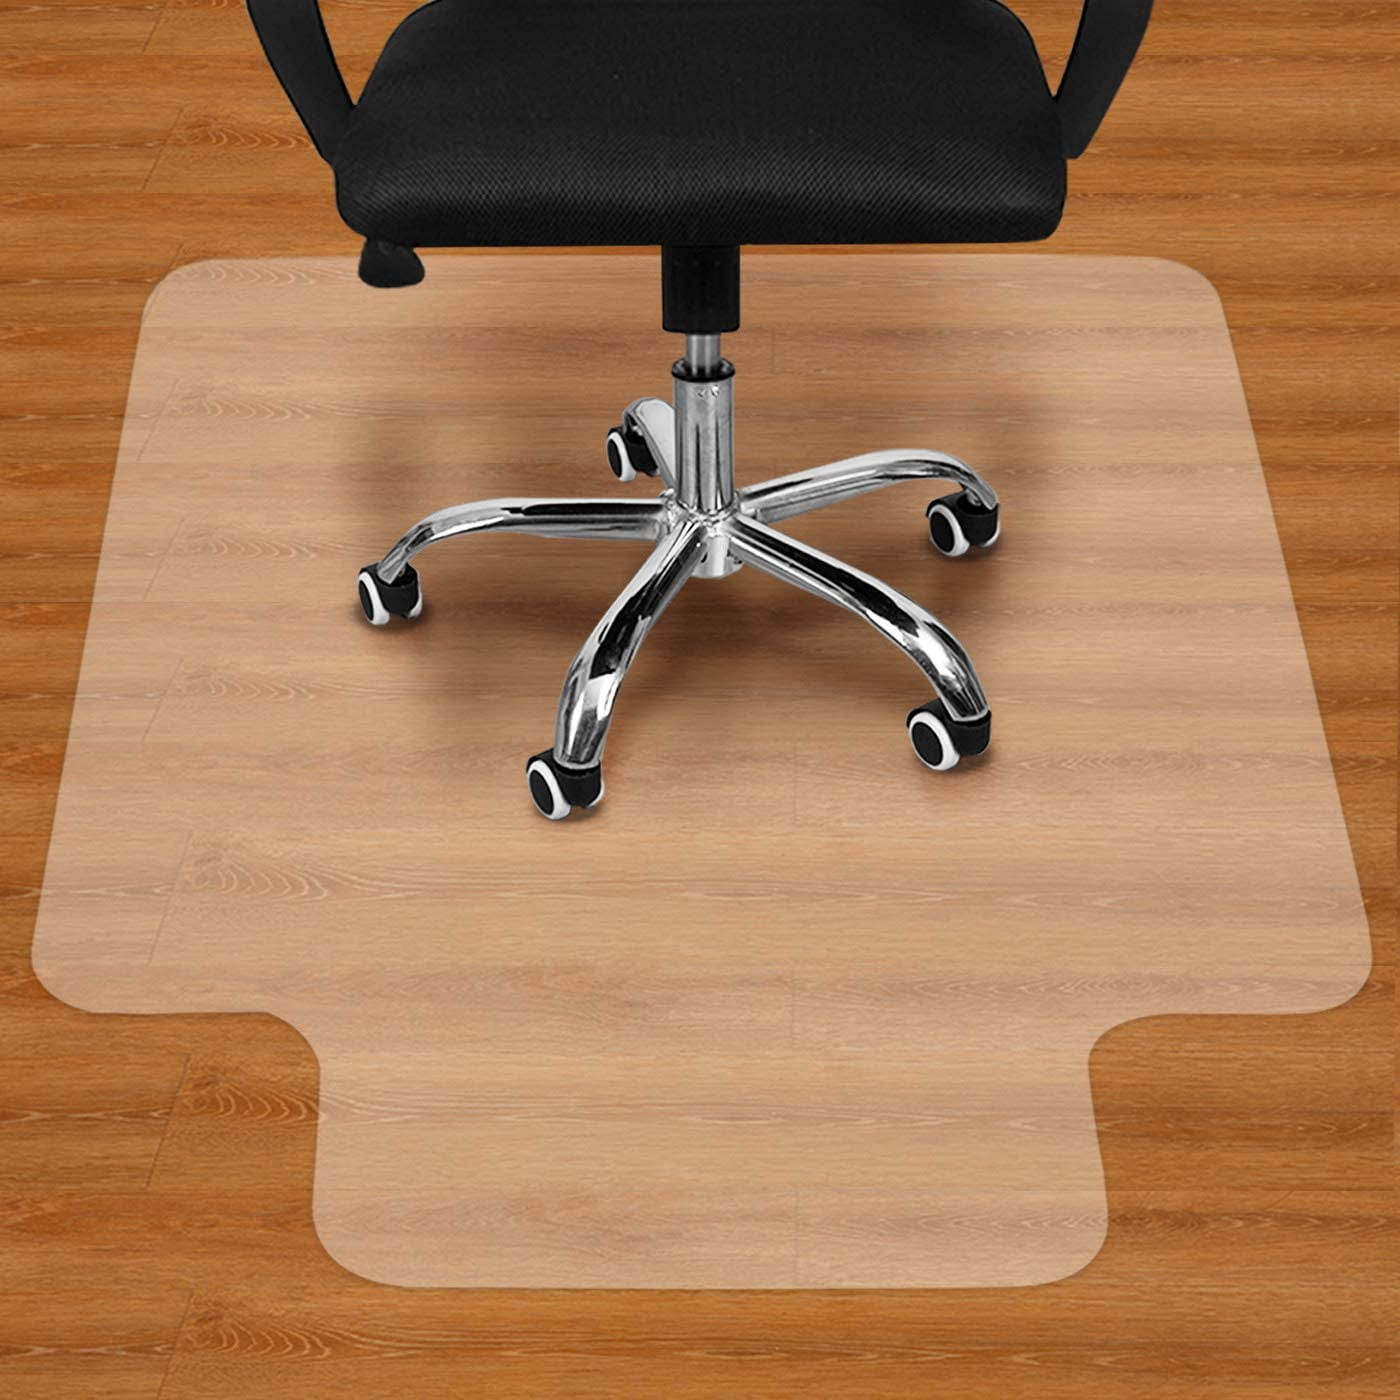 Chairs Move Smoothly ljyasd Transparent Office Chair Mat Non-Slip Protector Mat For Under Office Chair Office Floor Protector Mat Non-Slip 30x30cm/11.81x11.81in High Impact Strength